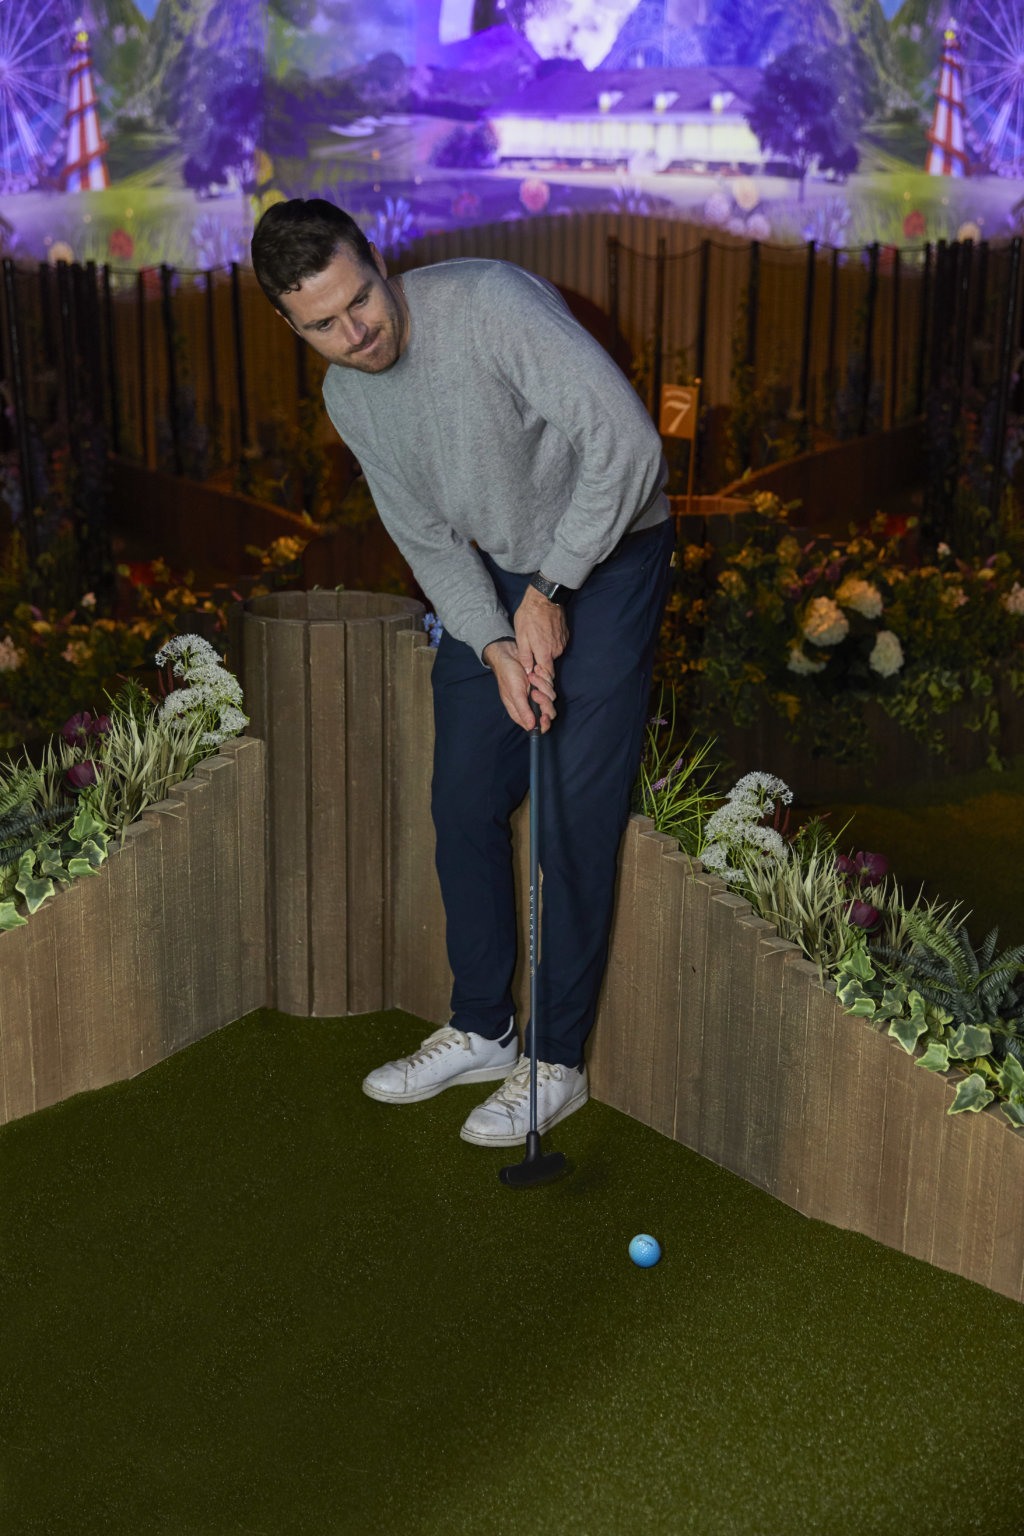 Swingers brings immersive mini golf experience to New York City with ... image